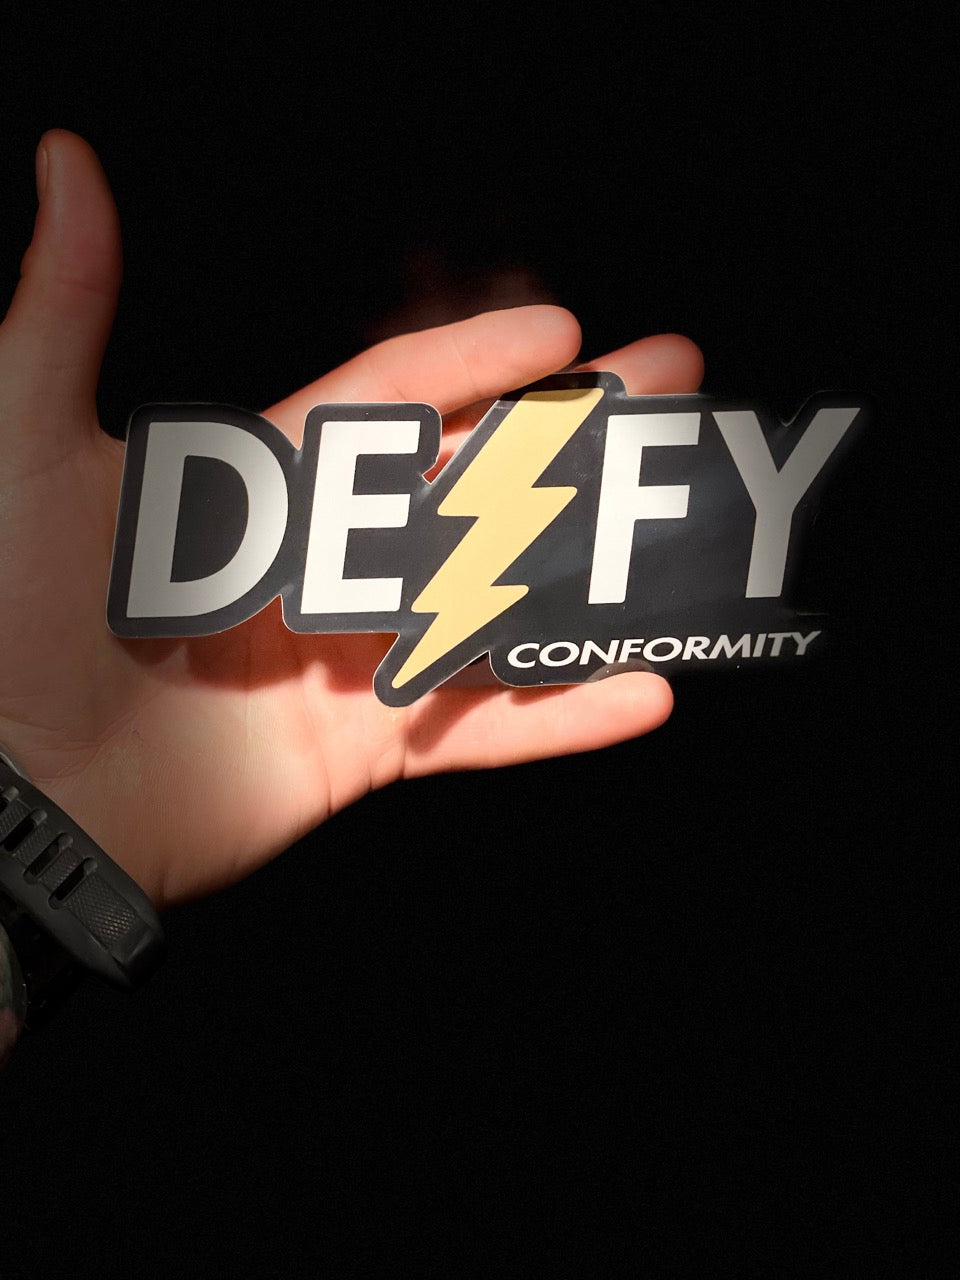 We Defy The Norm Stickers Defy Conformity - LARGE 7 inch Vinyl Sticker